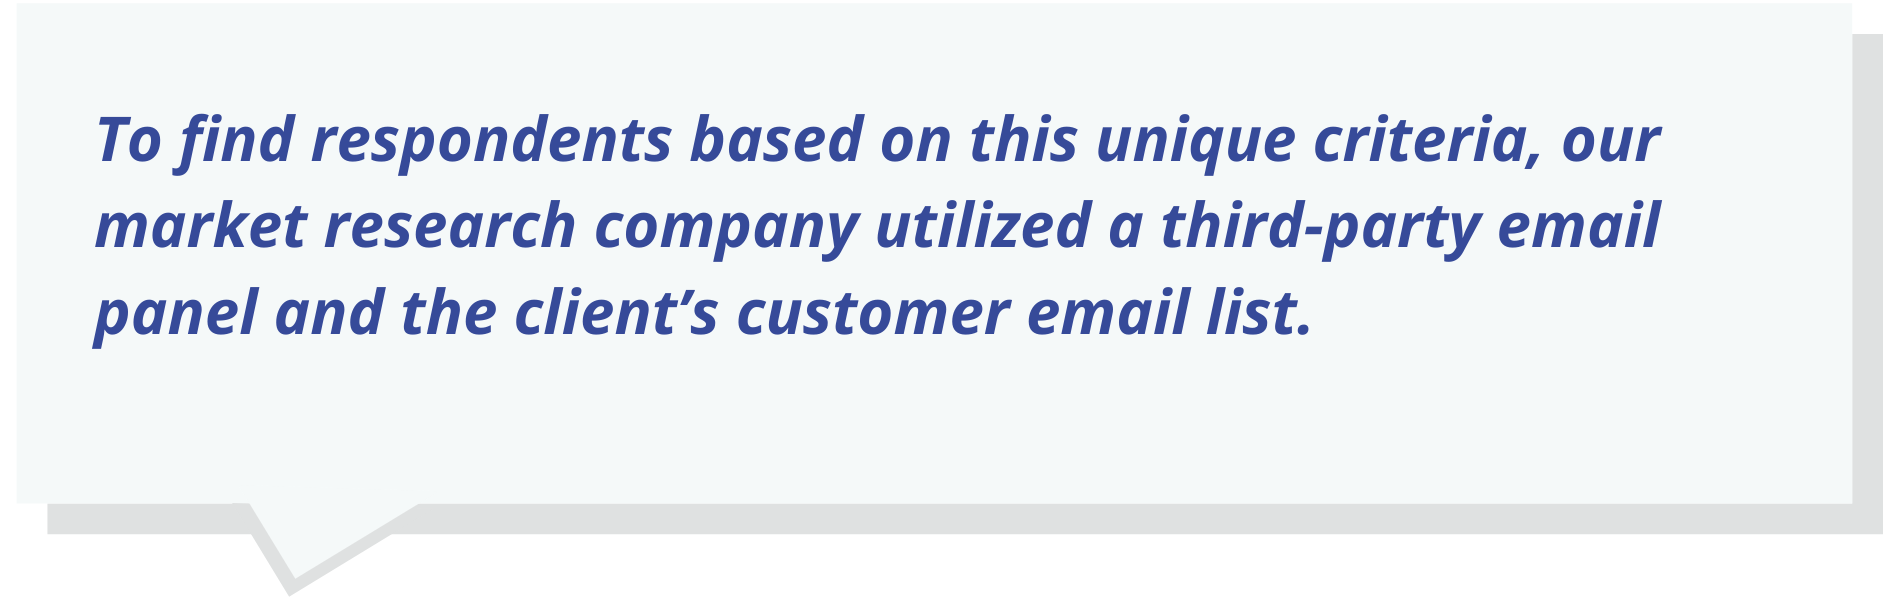 quote text: To find respondents based on this unique criteria, our market research company utilized a third-party email panel and the client’s customer email list.